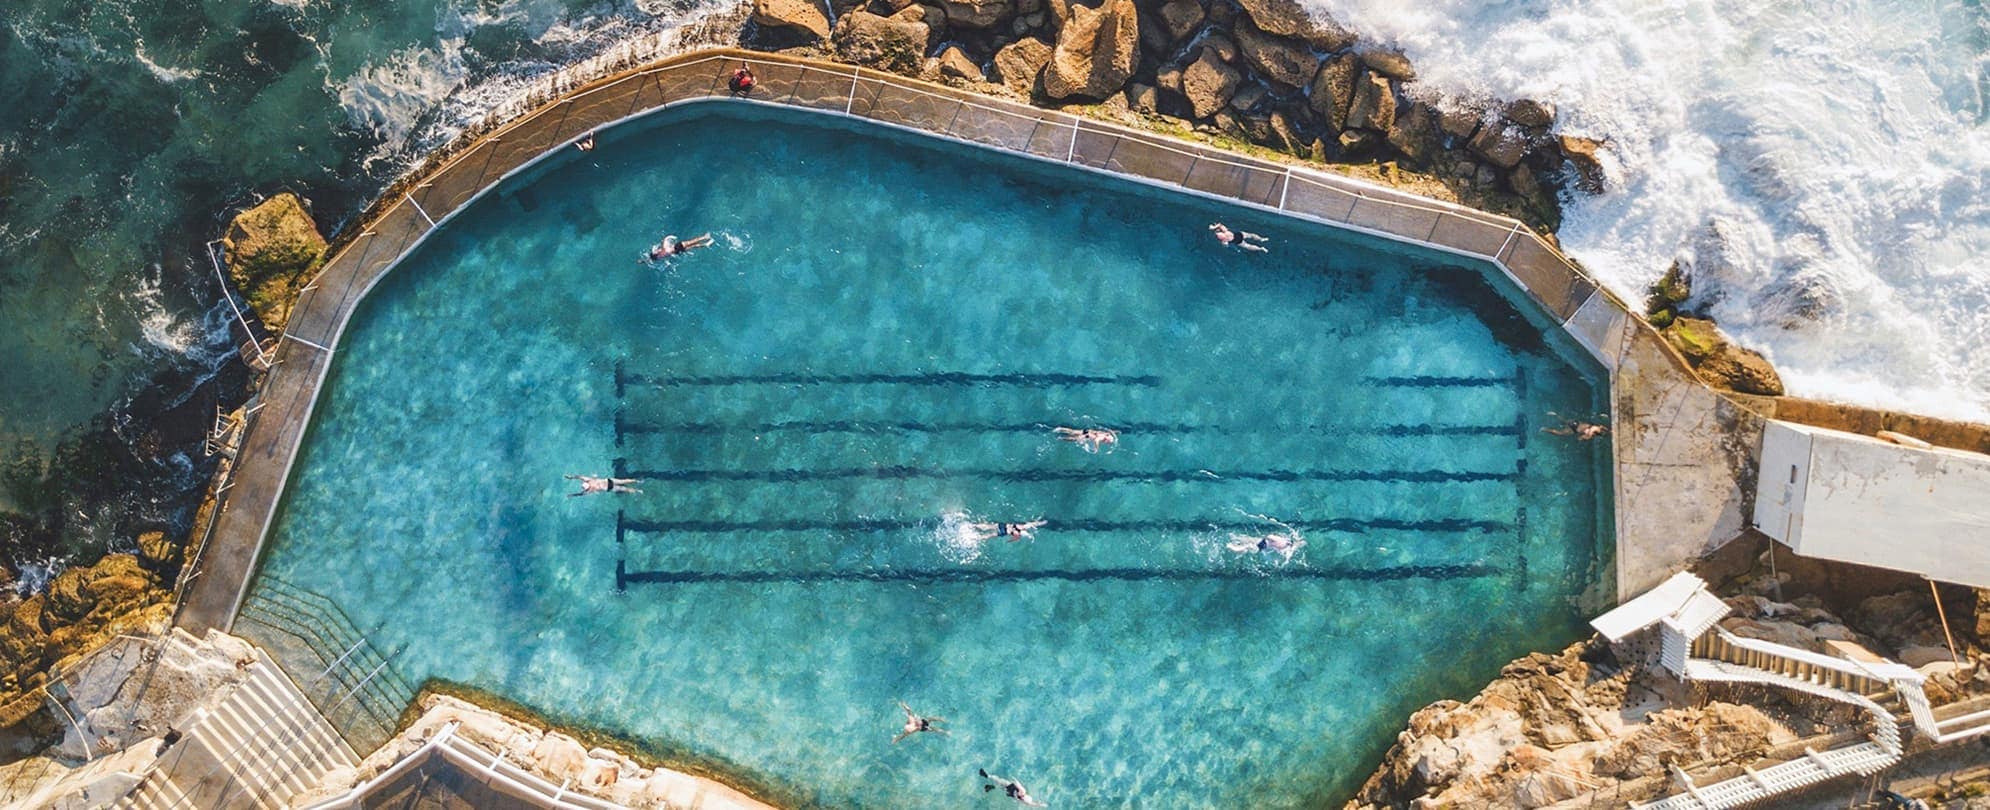 Bird's eye view of outdoor lap pool surrounded by the ocean 